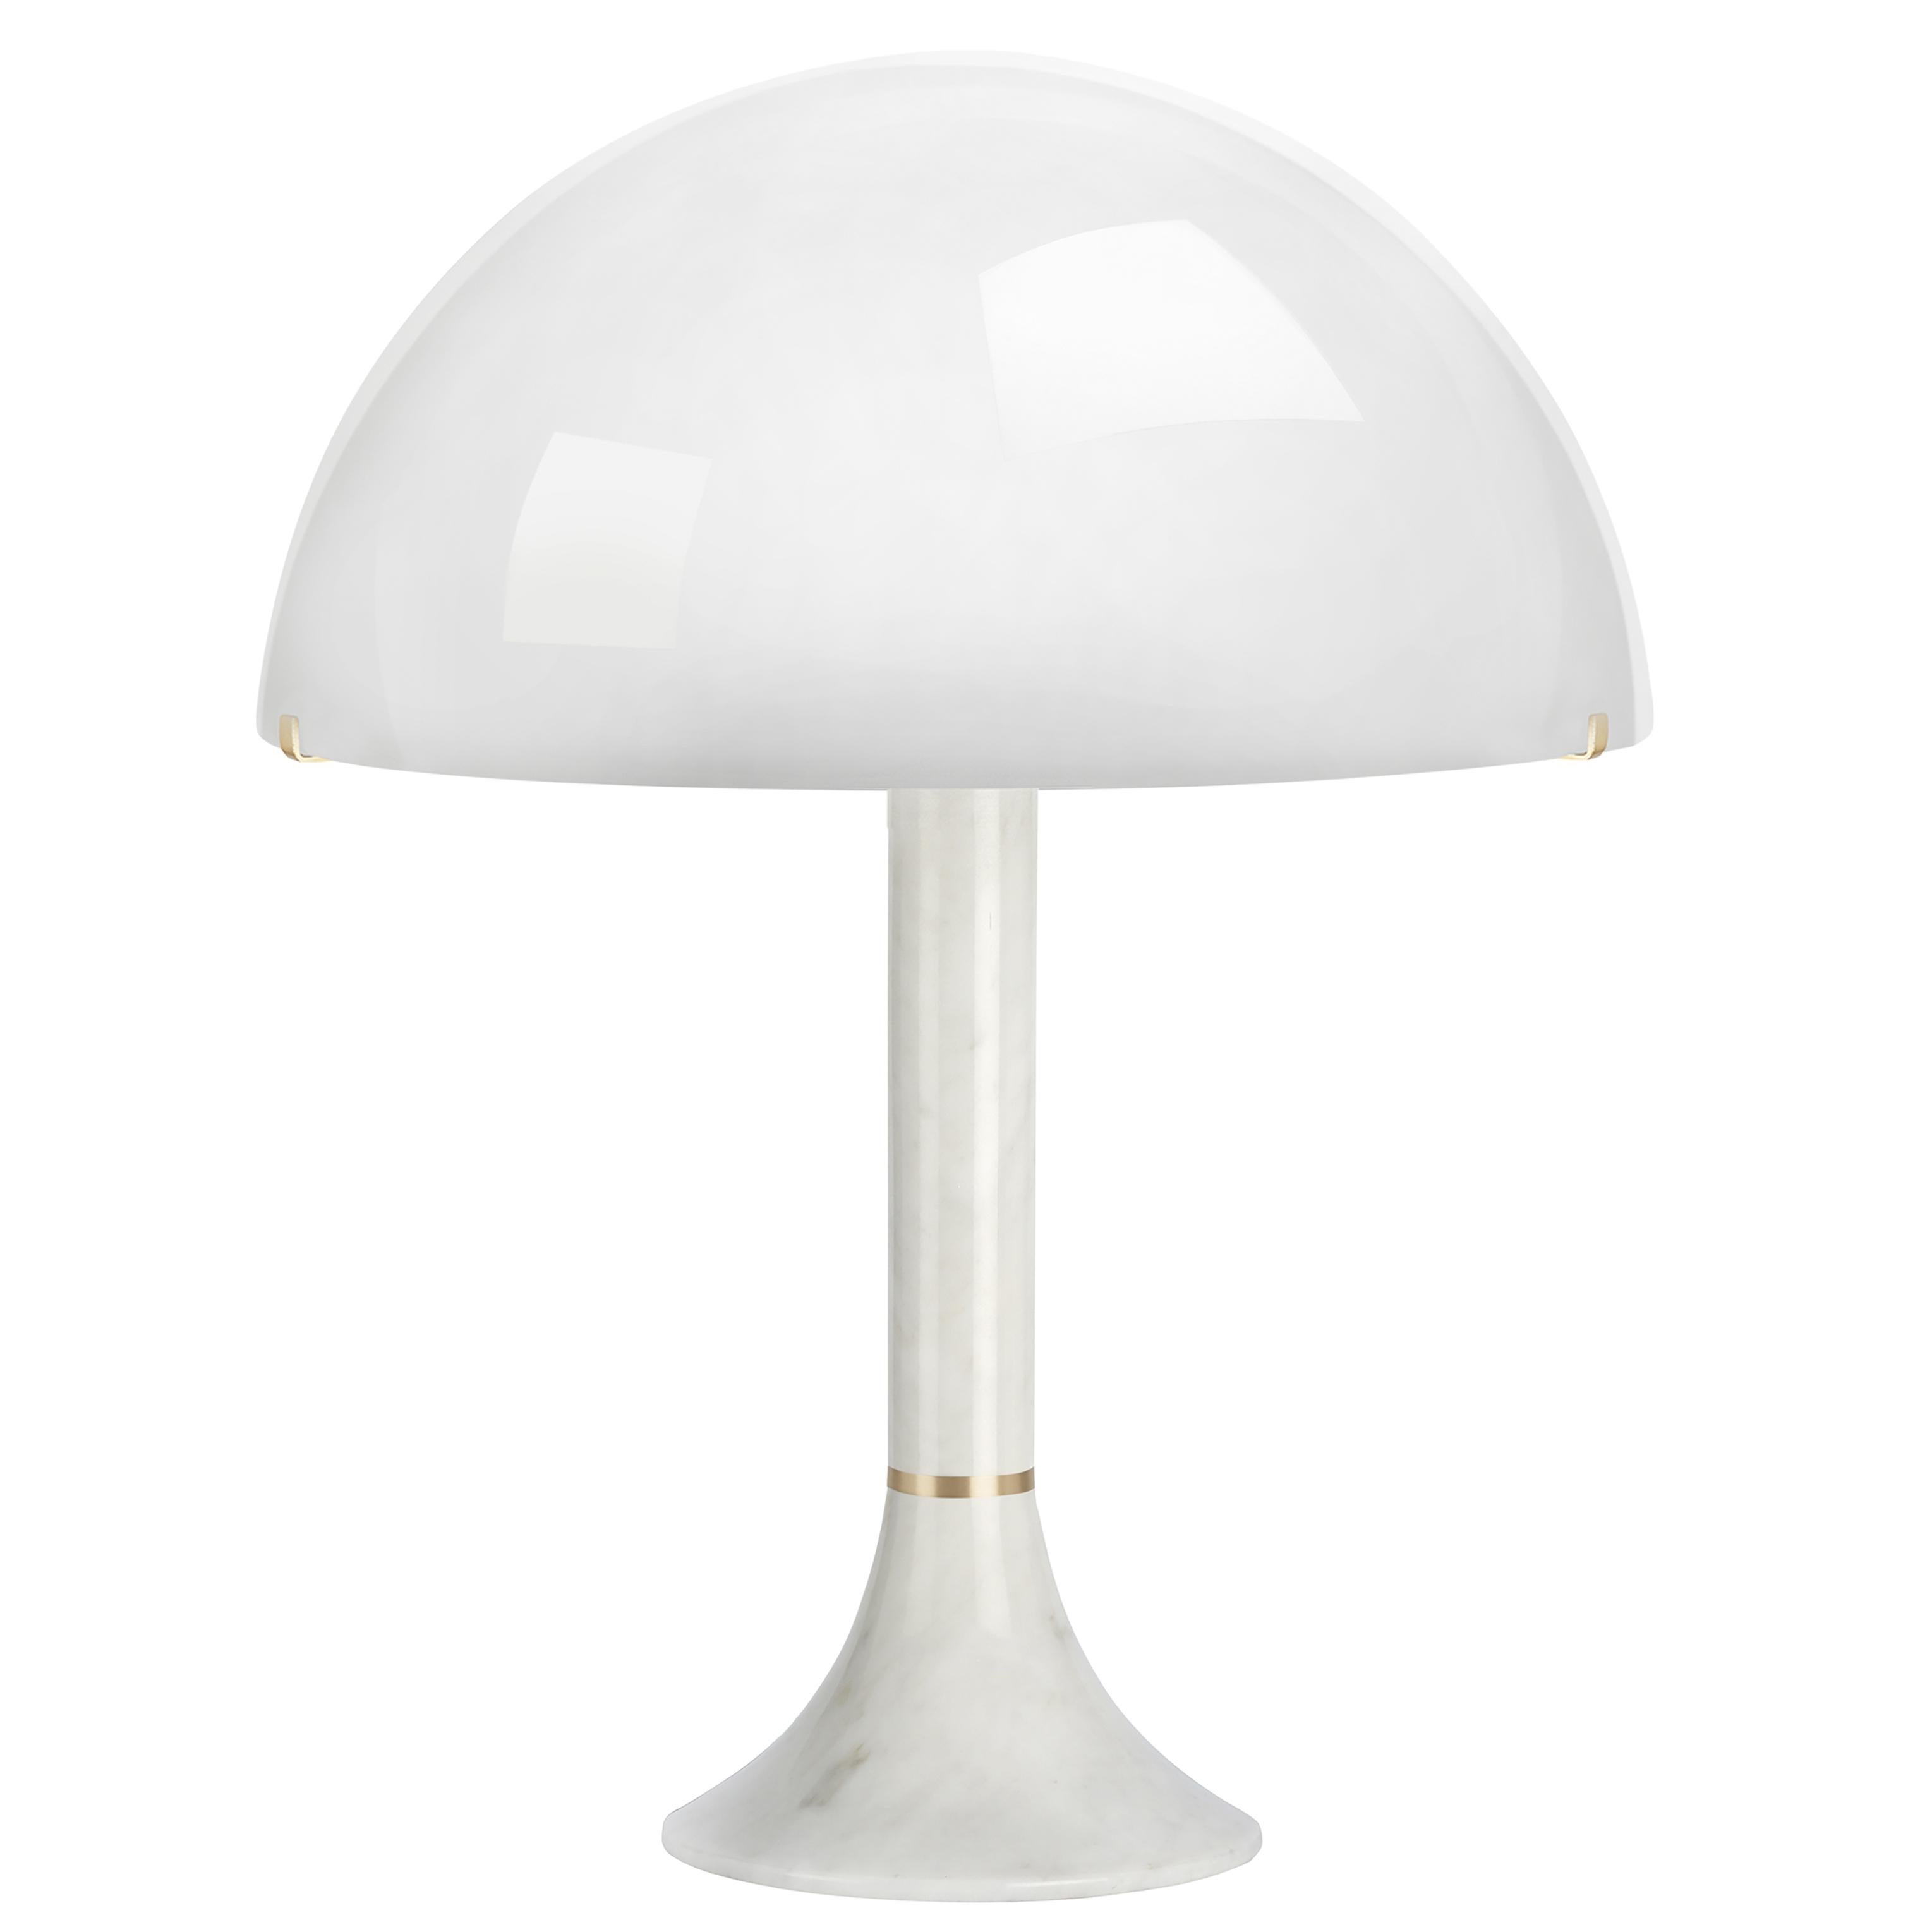 Bloomsbury table lamp by CTO Lighting
Materials: Polished white Carrara marble with satin brass and opal glass shade
Dimensions: W 38.5 x D 38.5 x H 49 cm

2 x E12, 60w max (or 6.5w LED 2700k)
weight 6kg (13.2lbs)
2000mm (78.8”) cord set with